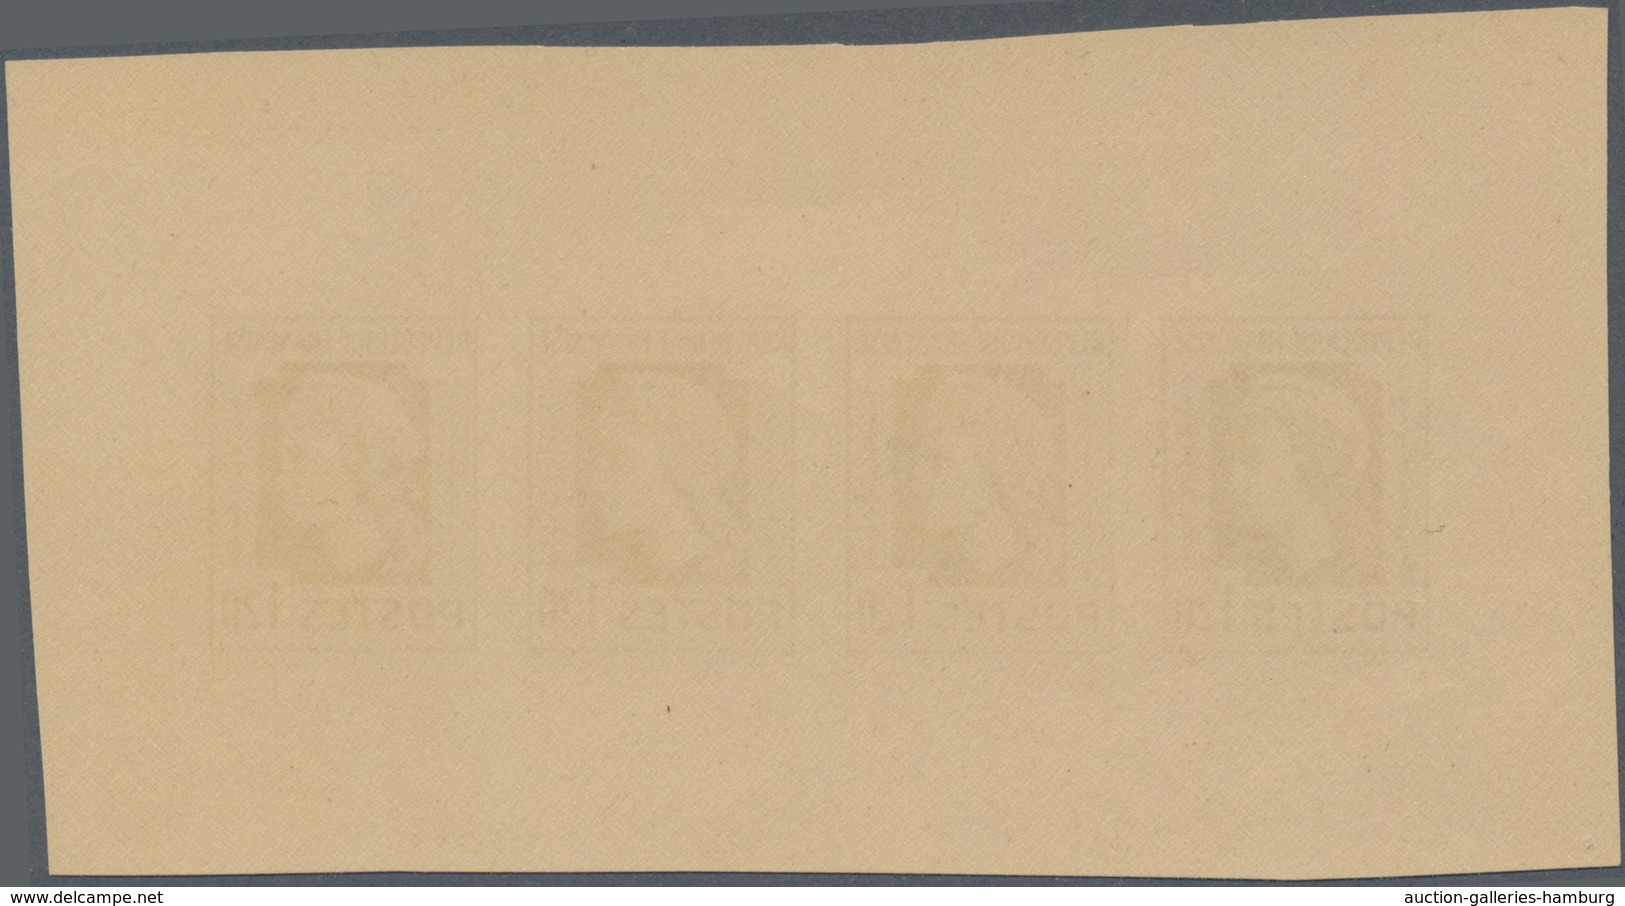 Frankreich: 1944, Definitives "Marianne", Not Issued, 1.20fr., Group Of Five Imperforate Panes Of Fo - Used Stamps